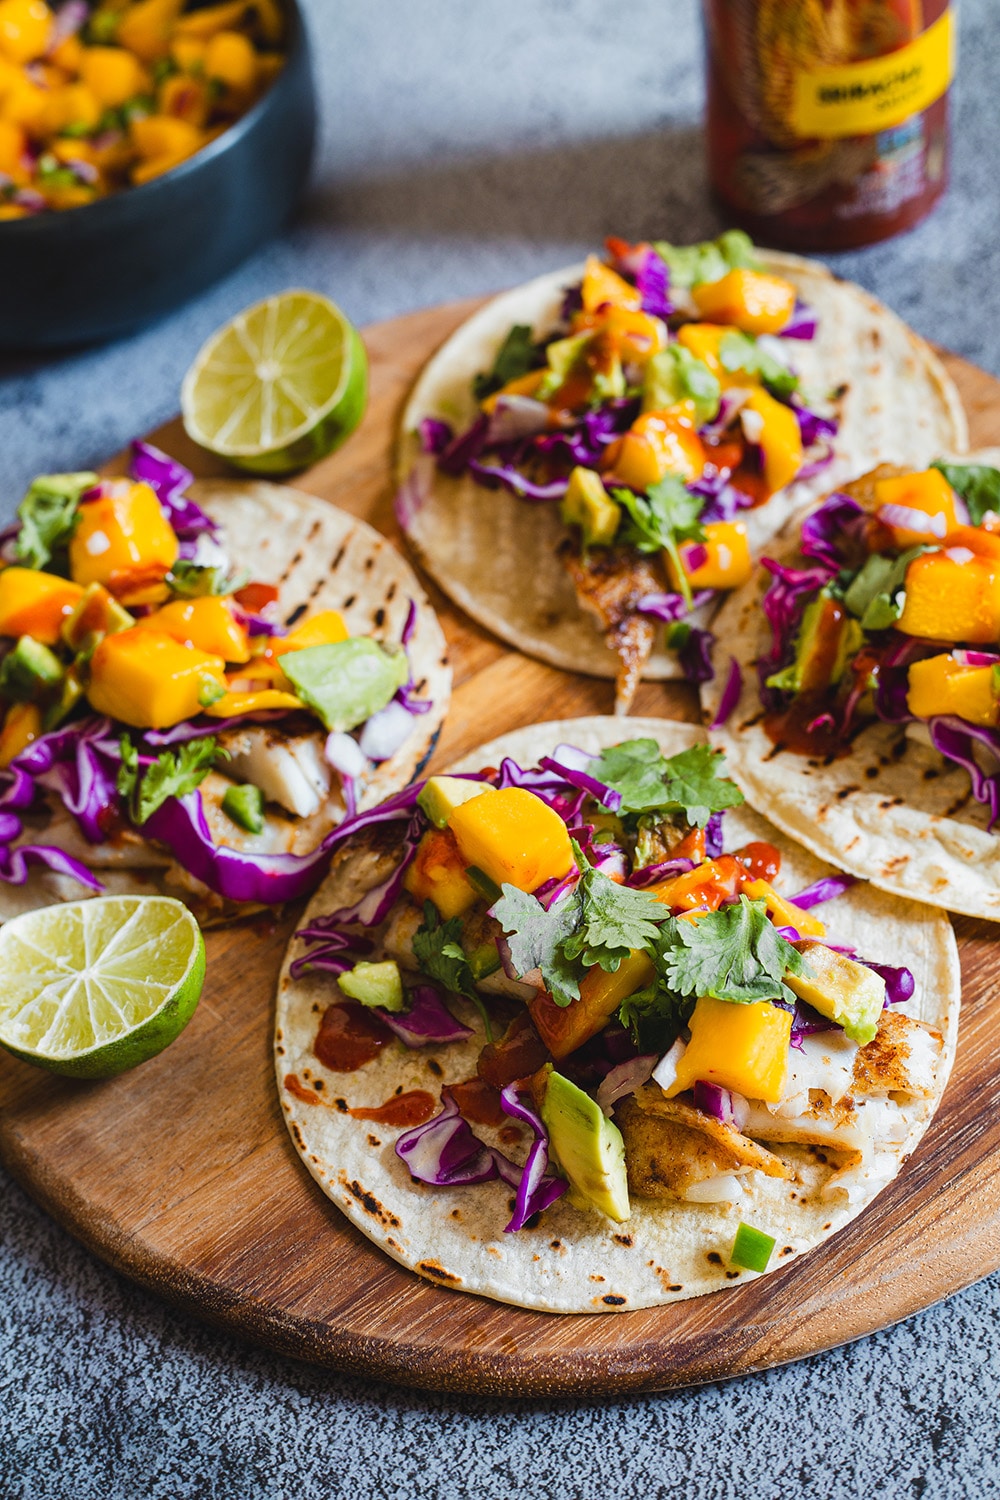 Experience explosive flavors with our fiery fish tacos recipe